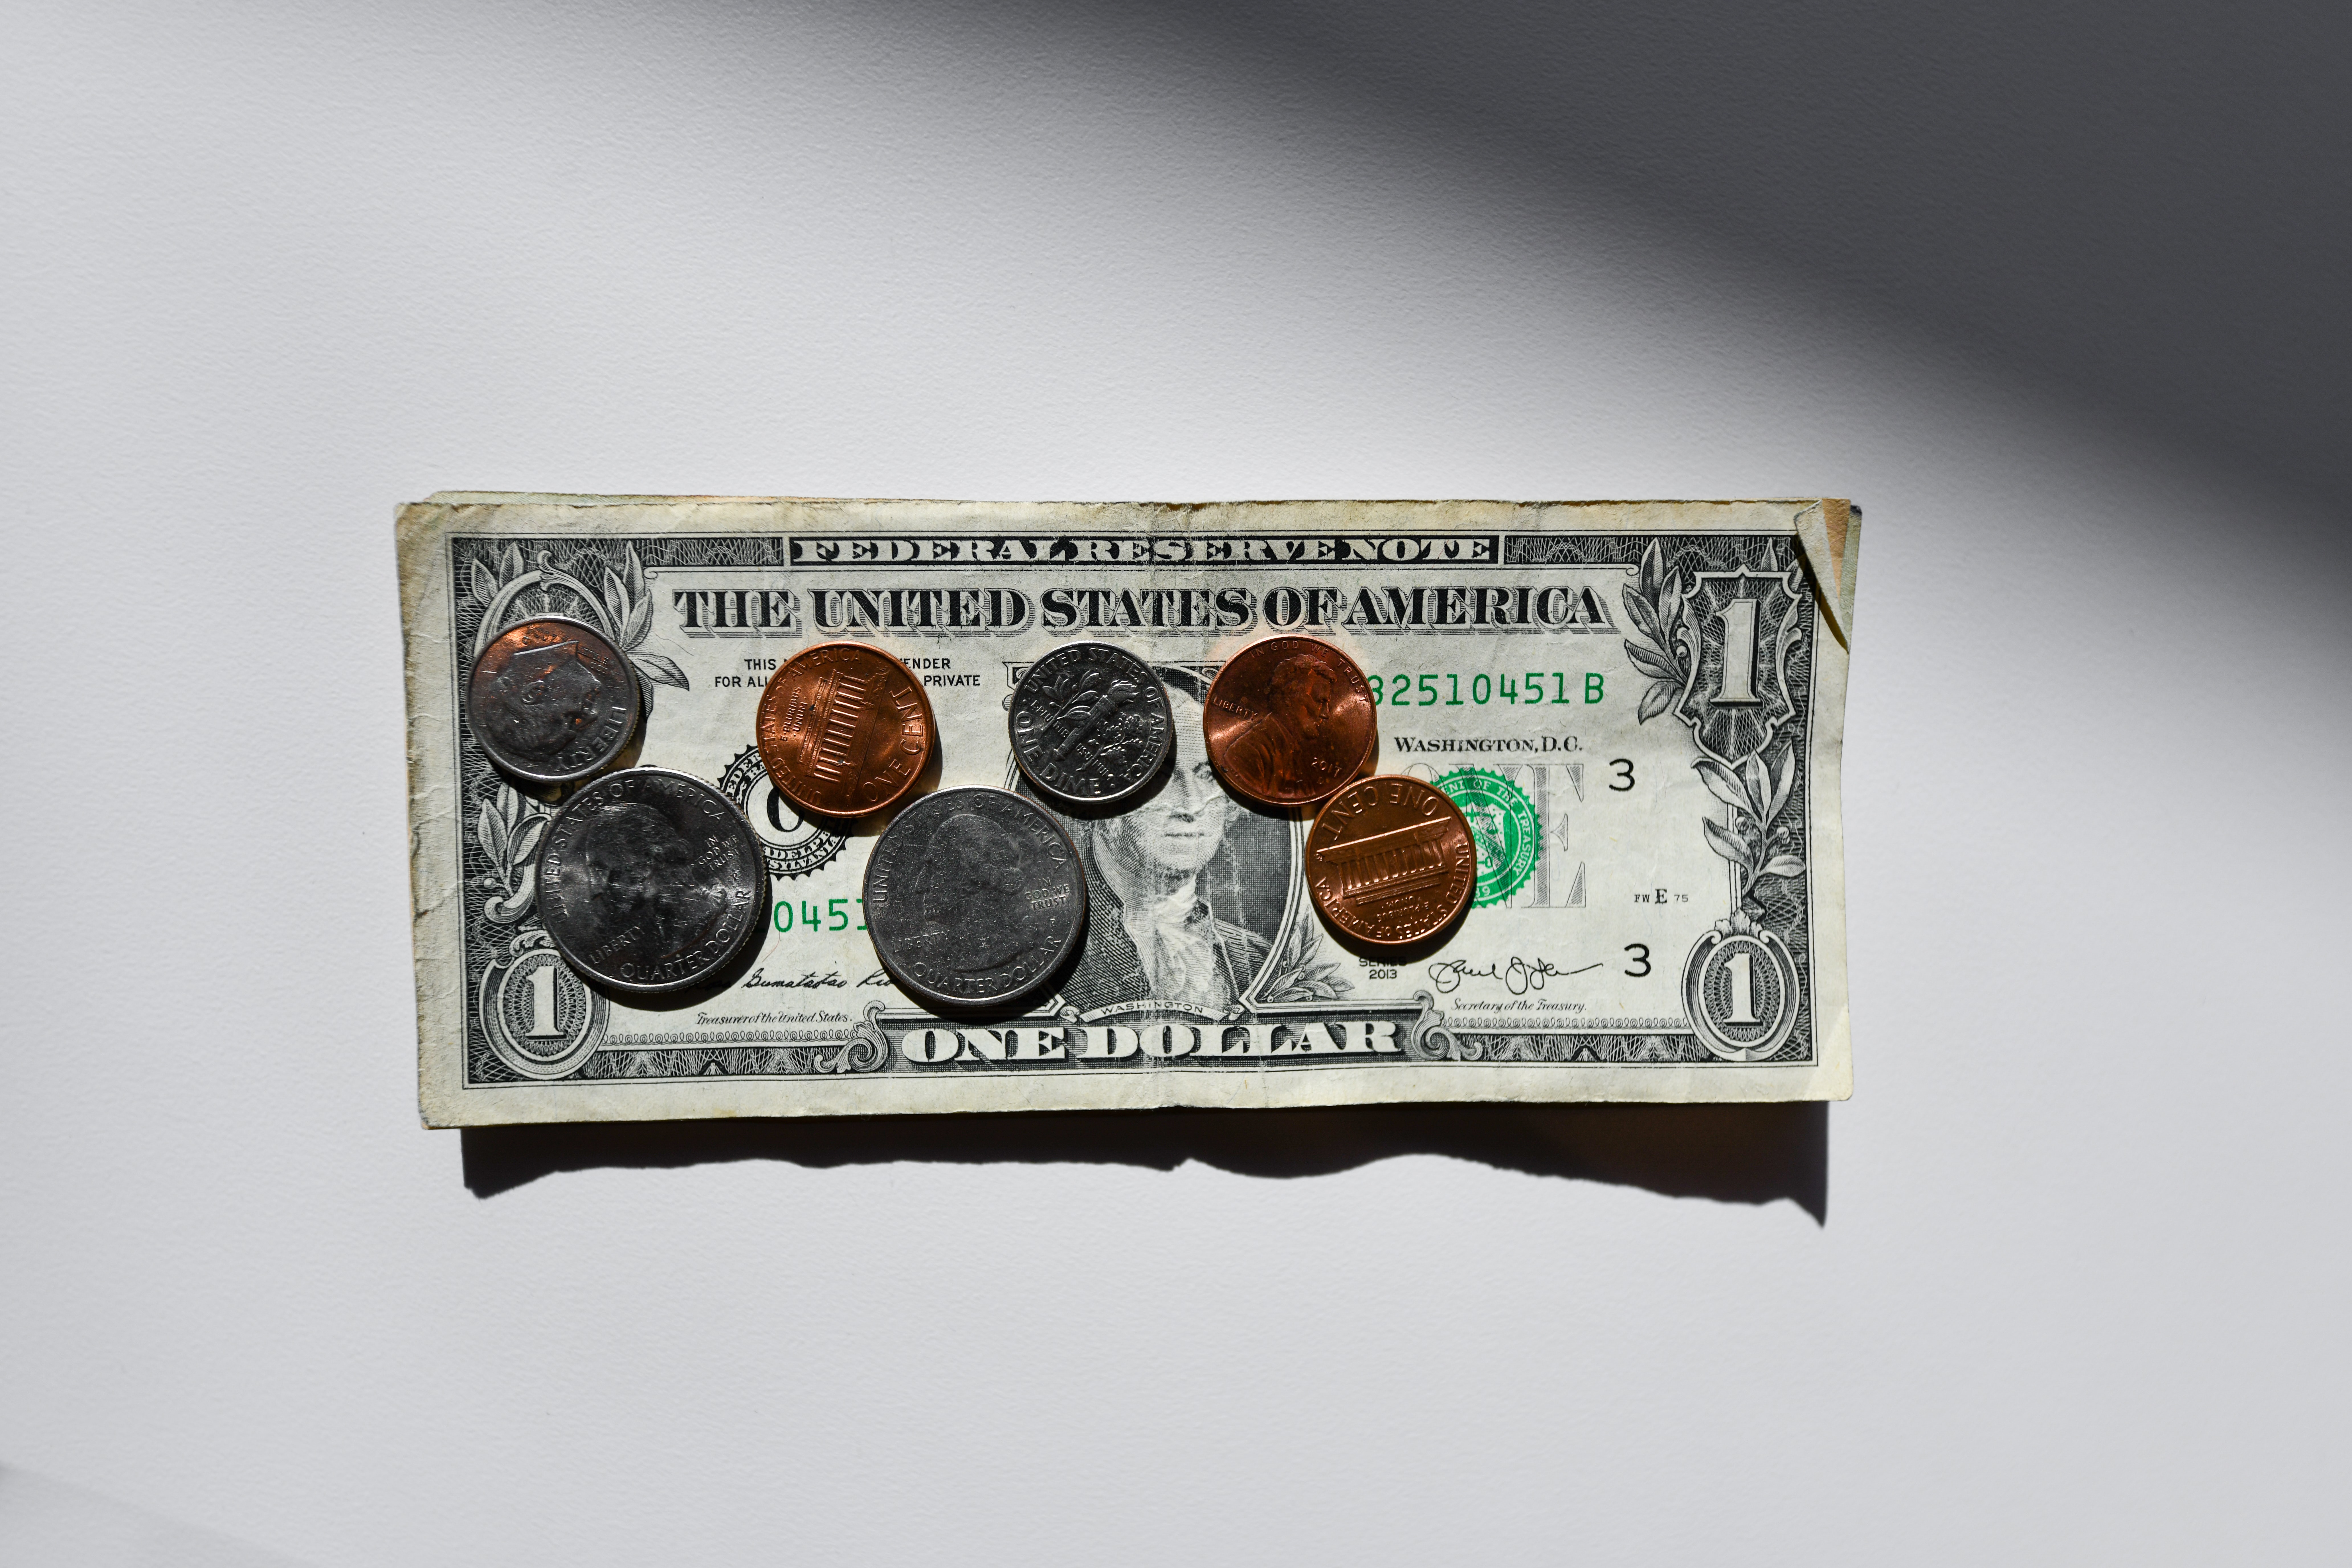 A dollar bill and various coins on a white background